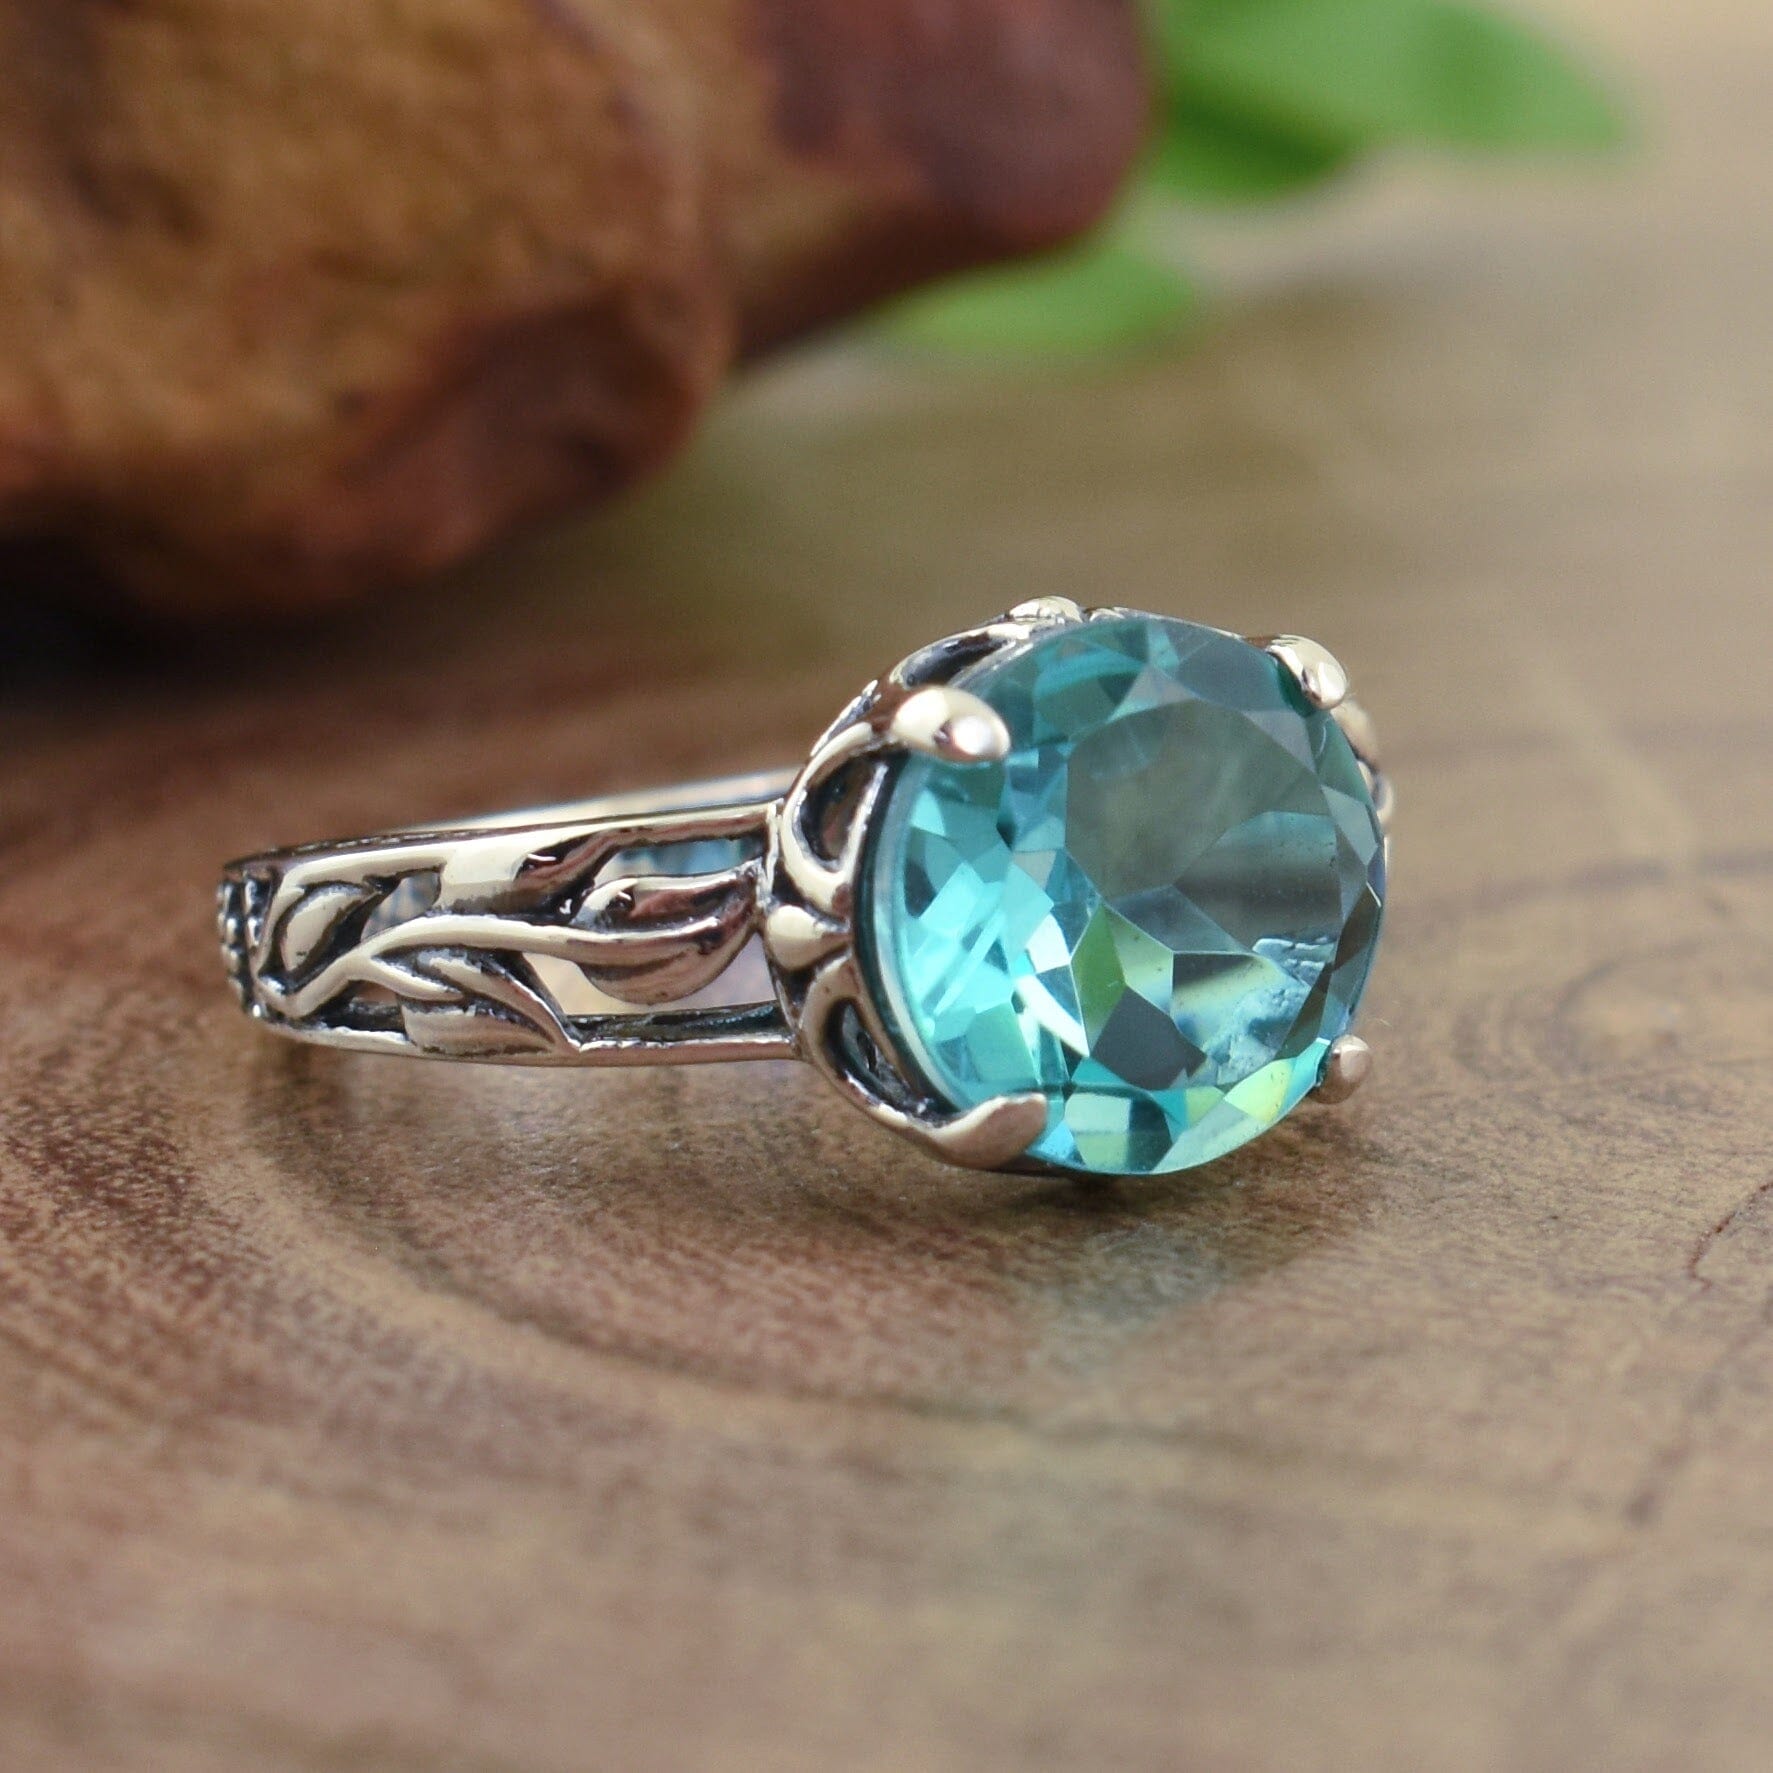 Sterling silver ring with round blue-green gemstone